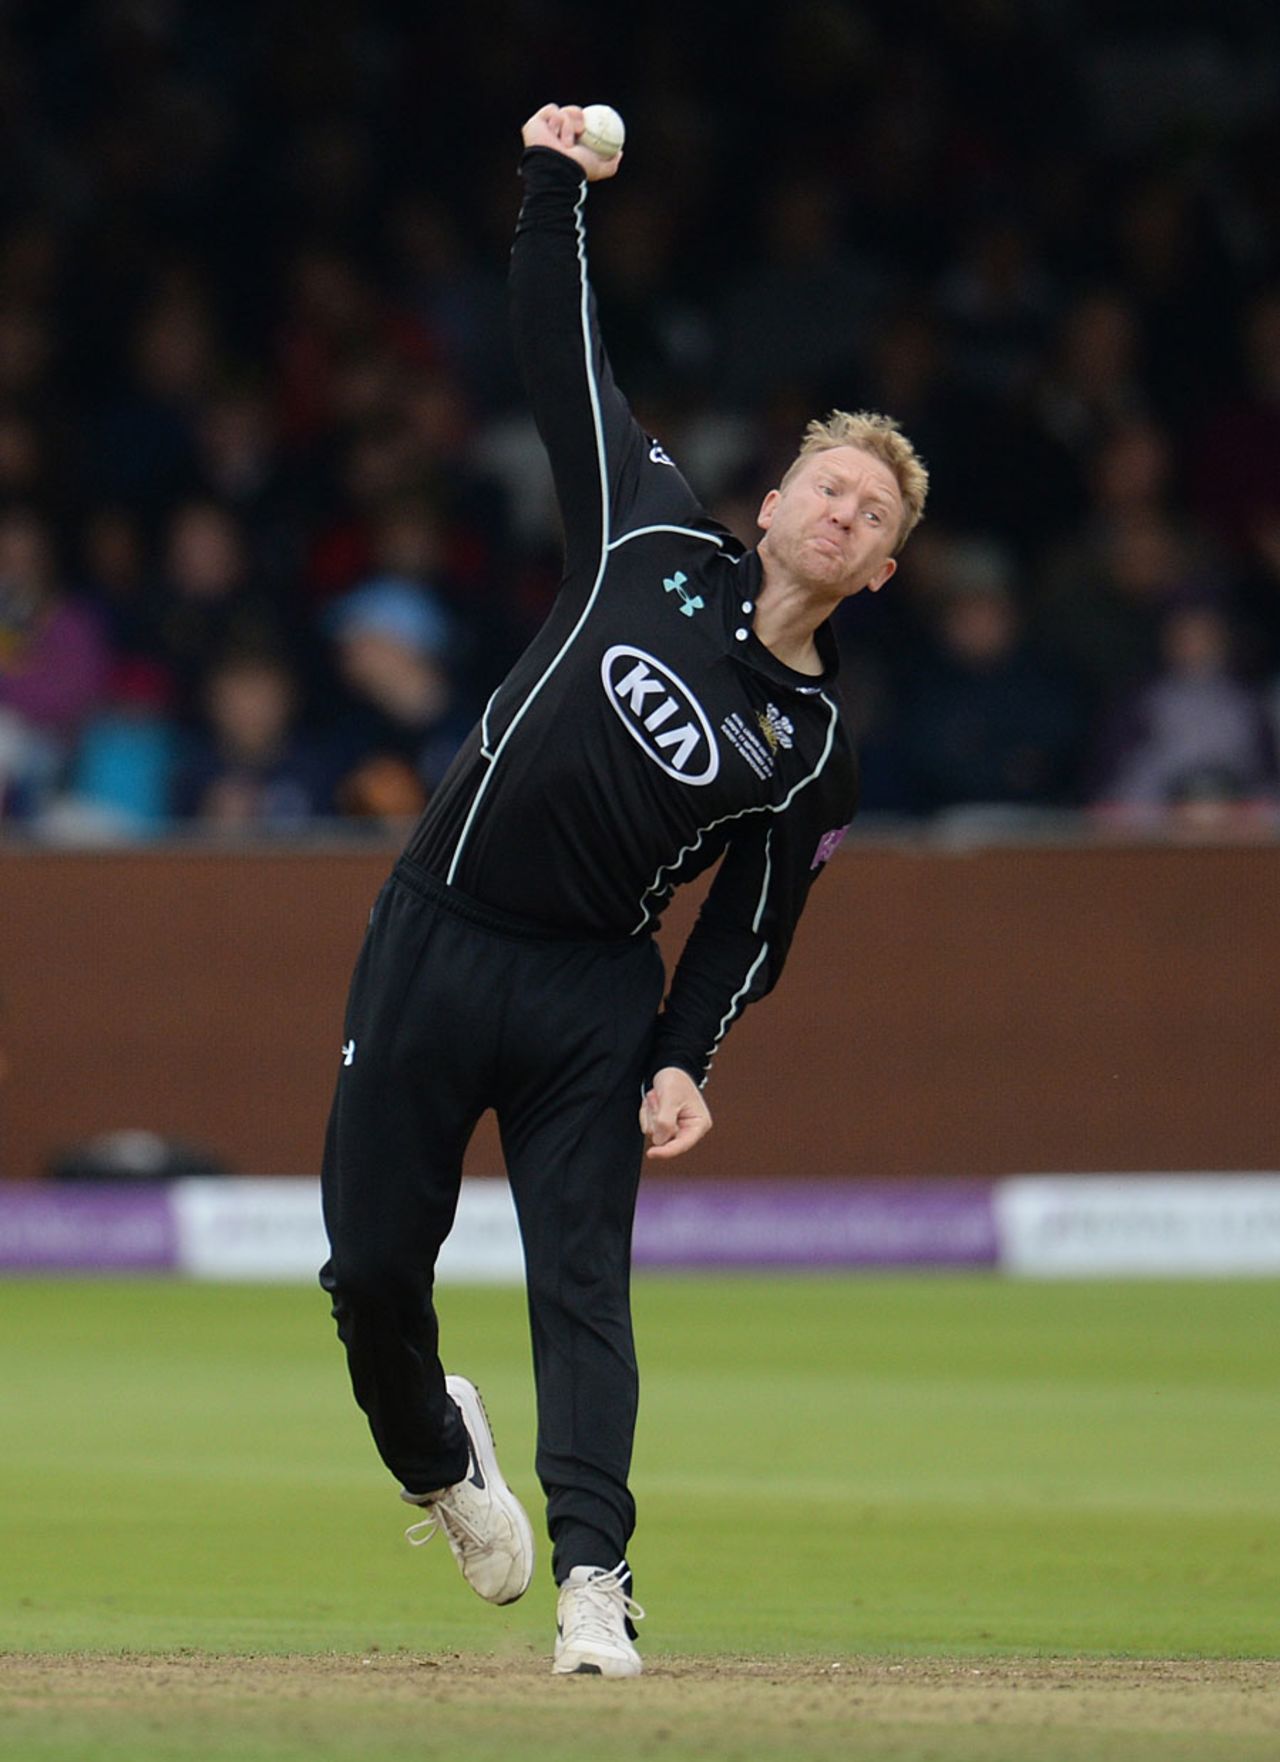 Gareth Batty in delivery stride, Surrey v Warwickshire, Royal London Cup Final, Lord's, September 17, 2016